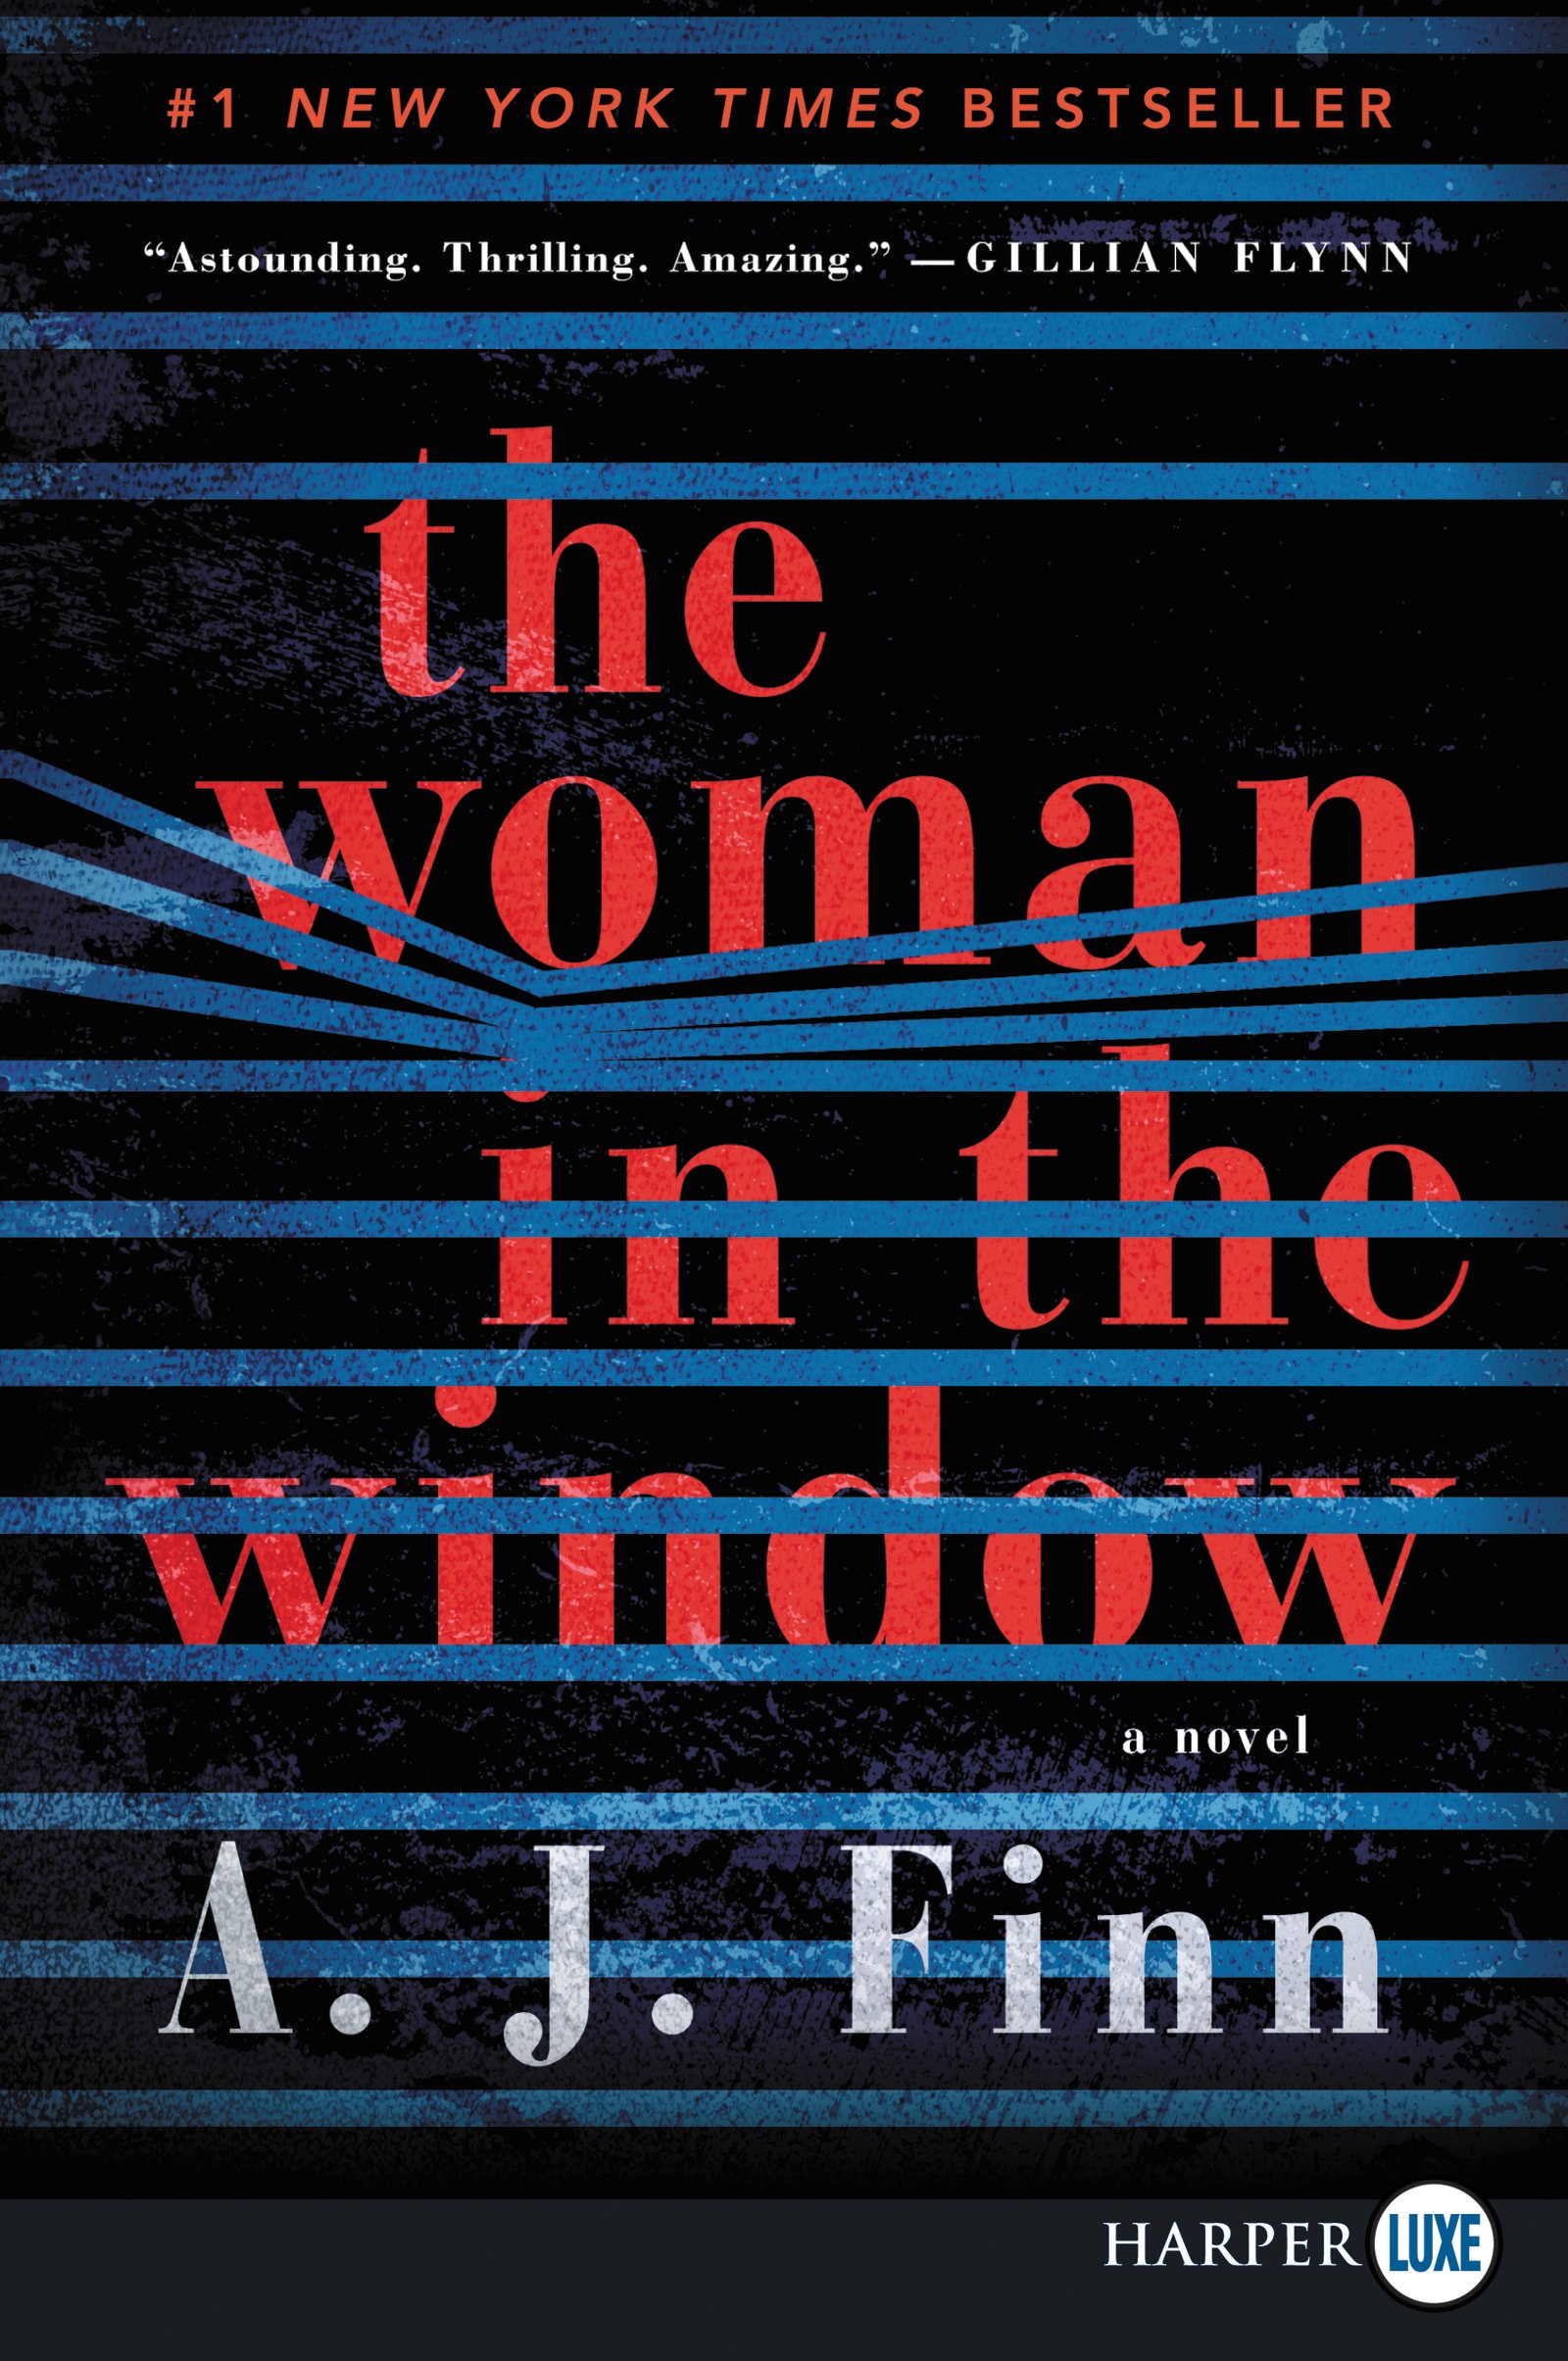 book review woman in the window